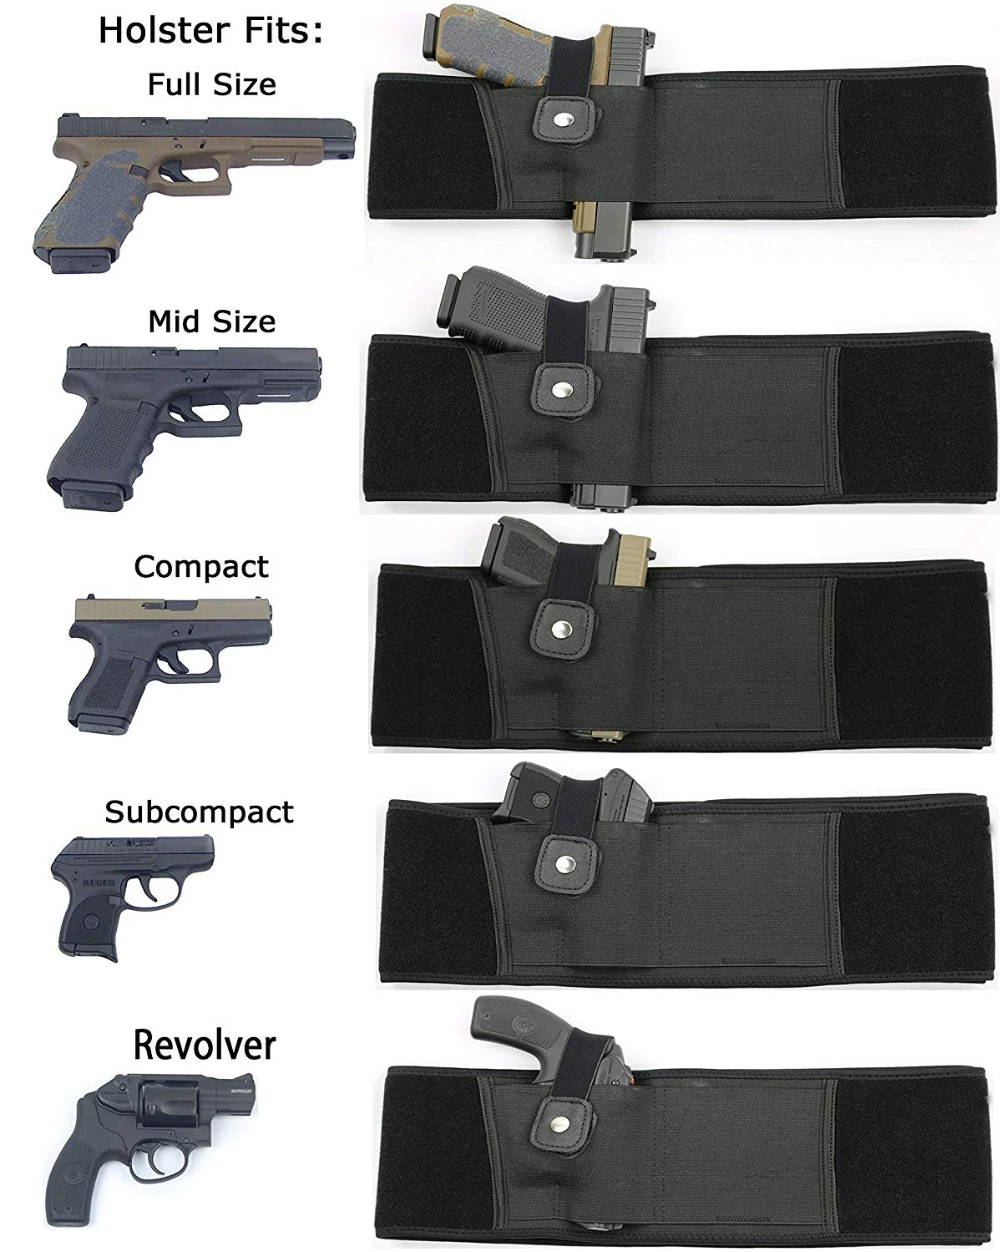 belly band holster fit all type of pistol such as full size pistol, mid size, compact, sub compact, revolver pistols.